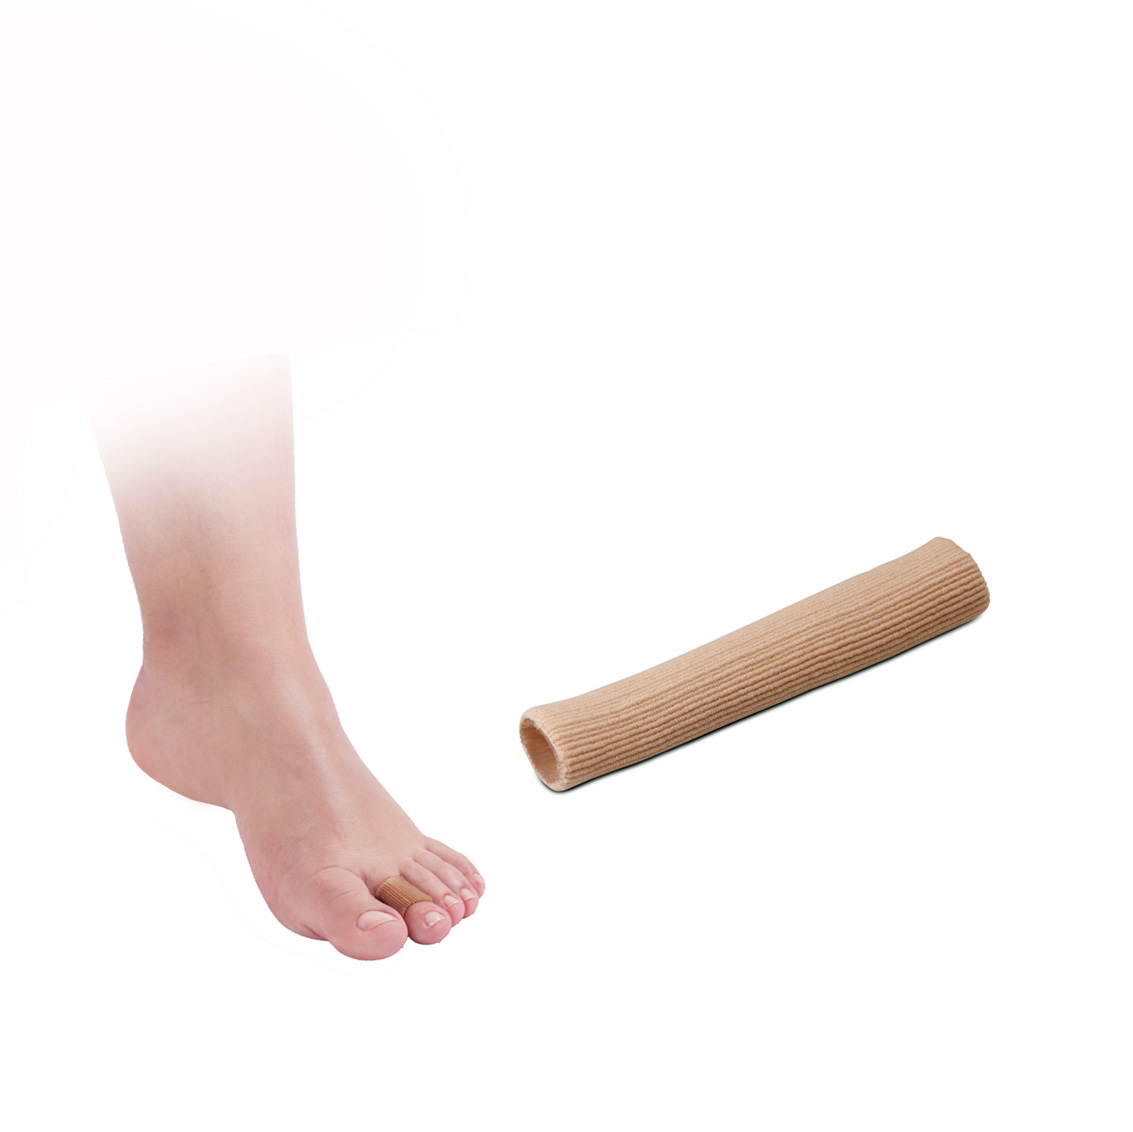 Fabric and gel toe tubes